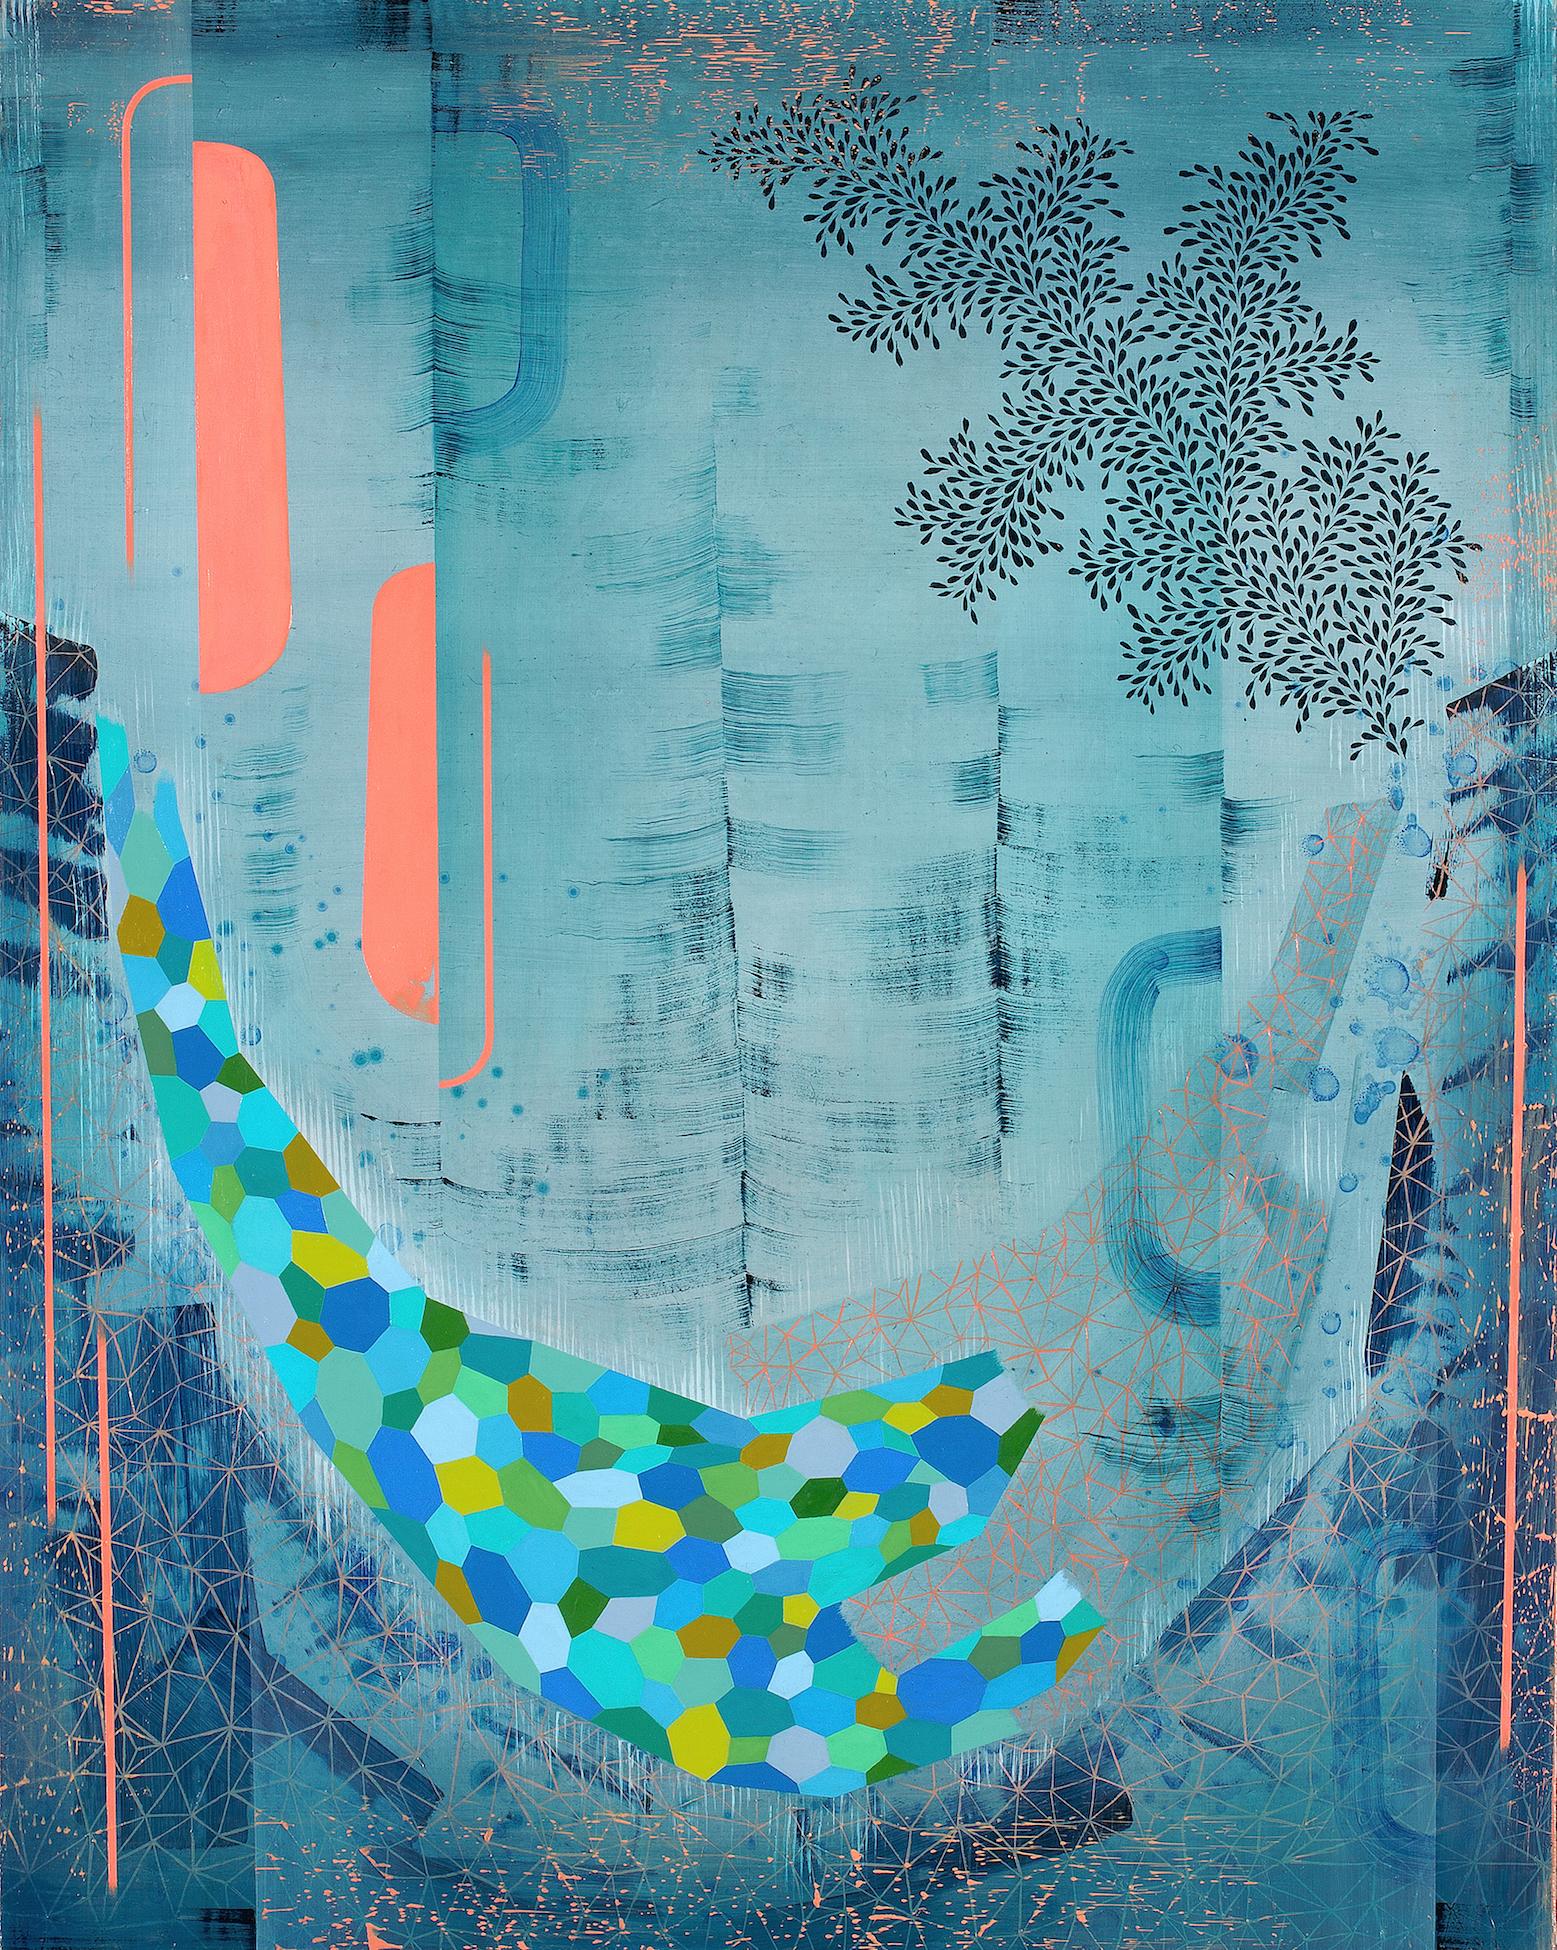 Carefully ordered patterns, geometric shapes and delicate lines in luminous light pale peach, teal, olive green, ochre and blue on a light blue background with a dark indigo leaf pattern. Signed, dated and titled on verso.

Exploring a world beyond